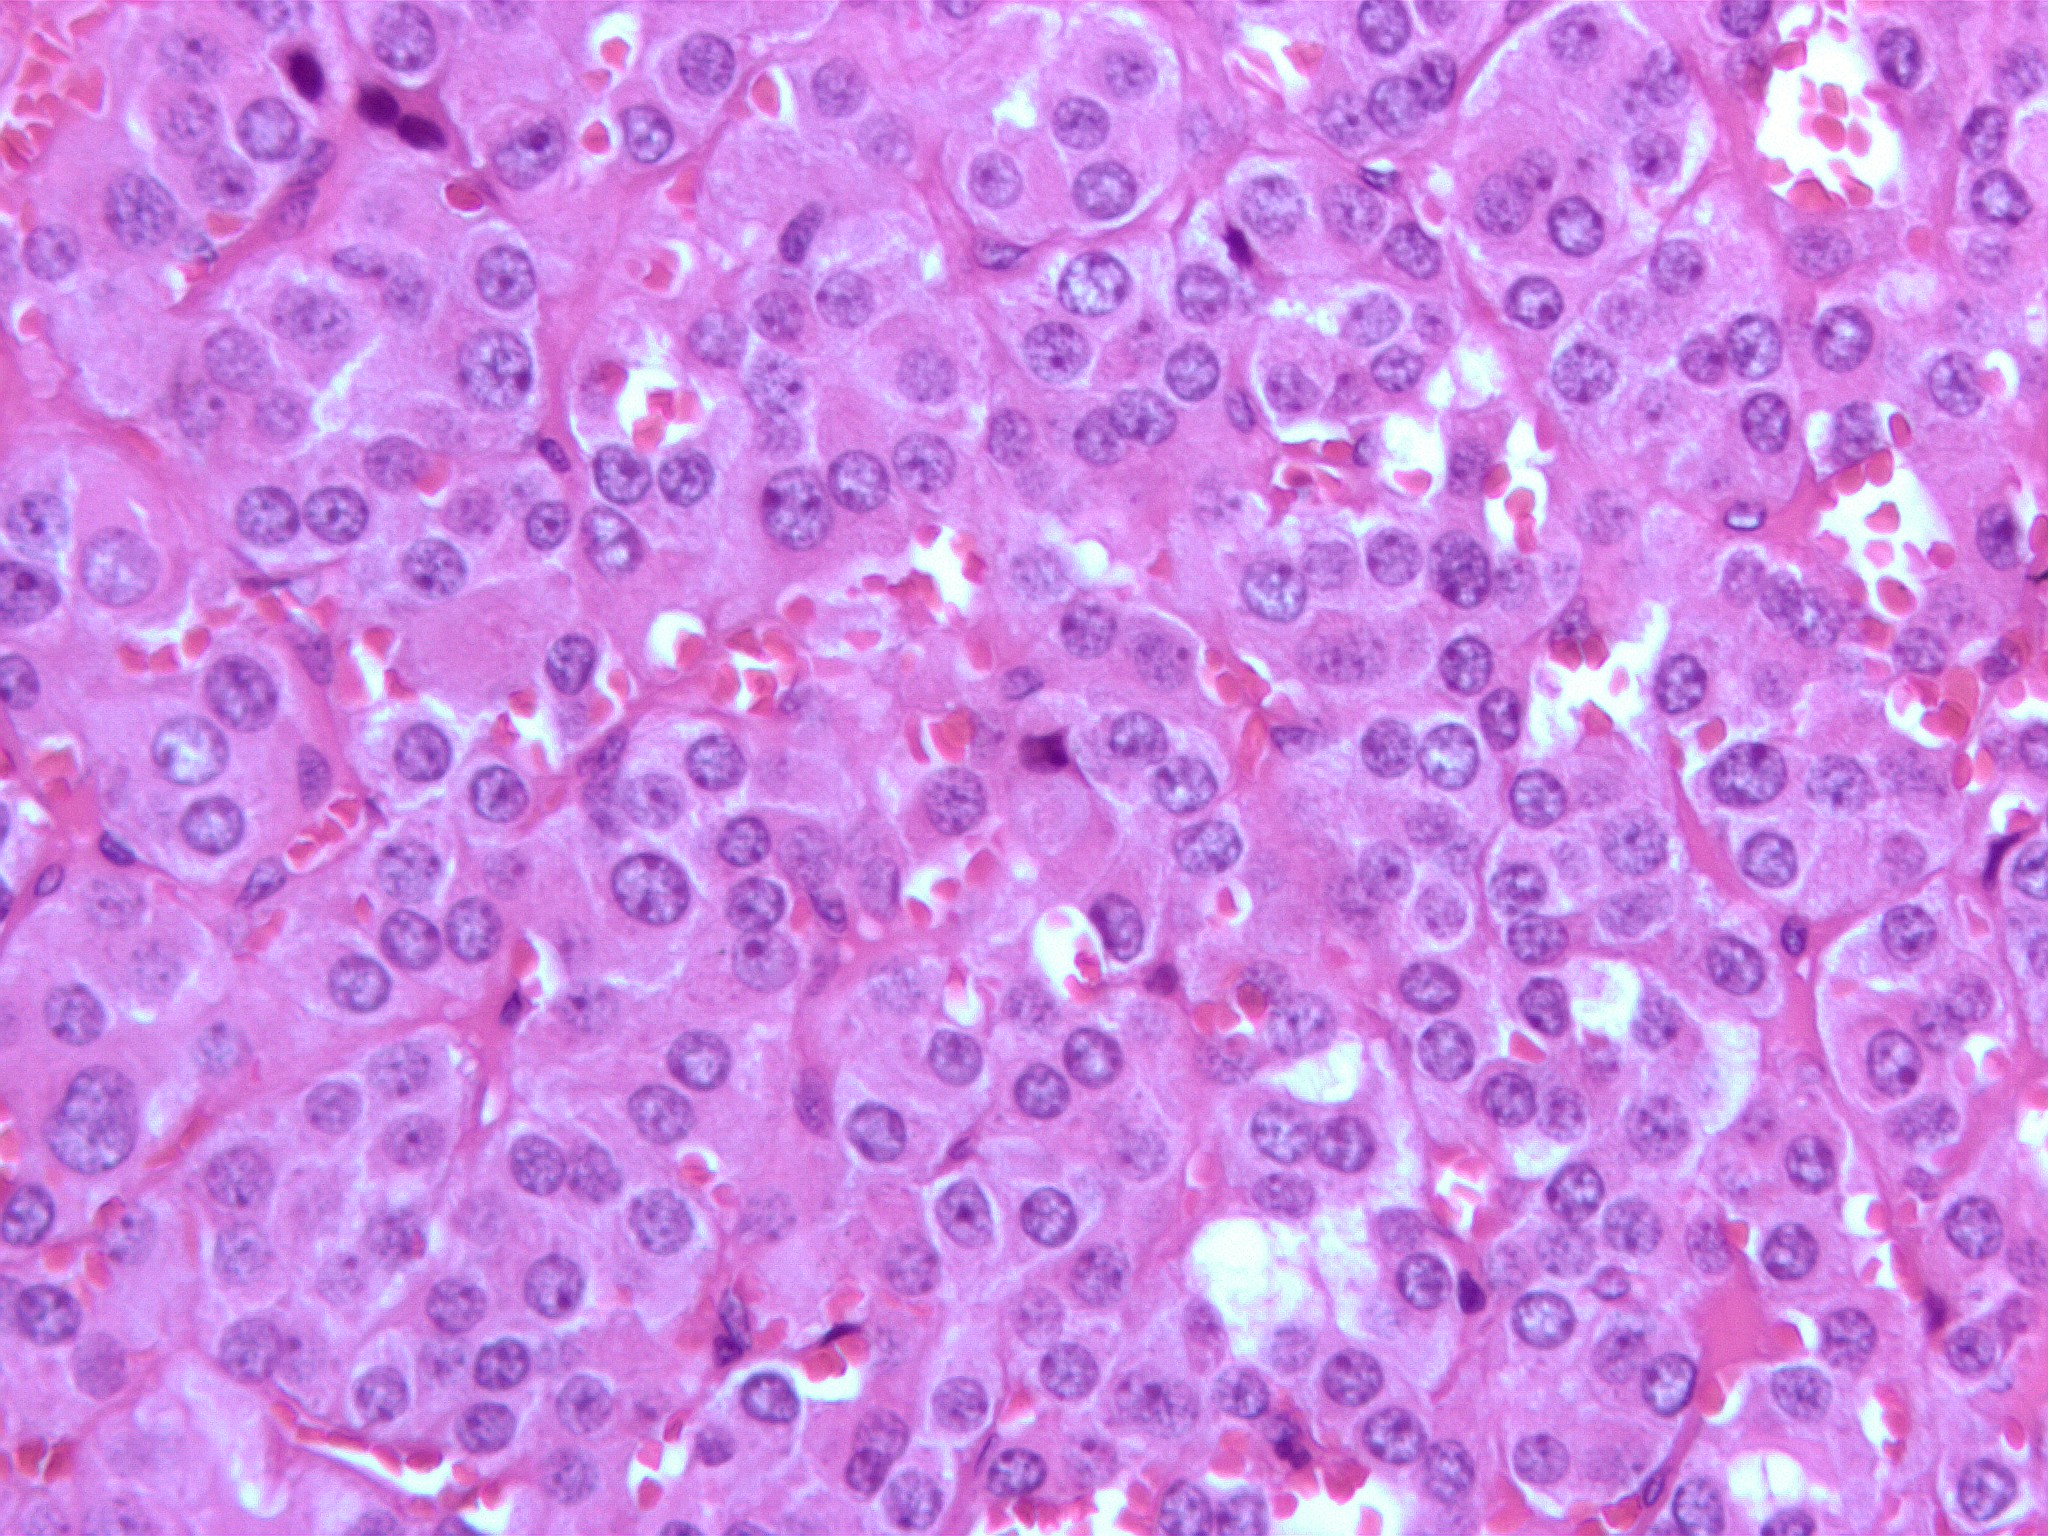 Micrograph of a pheochromocytoma (at high magnification) showing the characteristic stippled (finely granular) chromatin. The chromatin pattern is sometimes referred to as "salt-and-pepper" chromatin